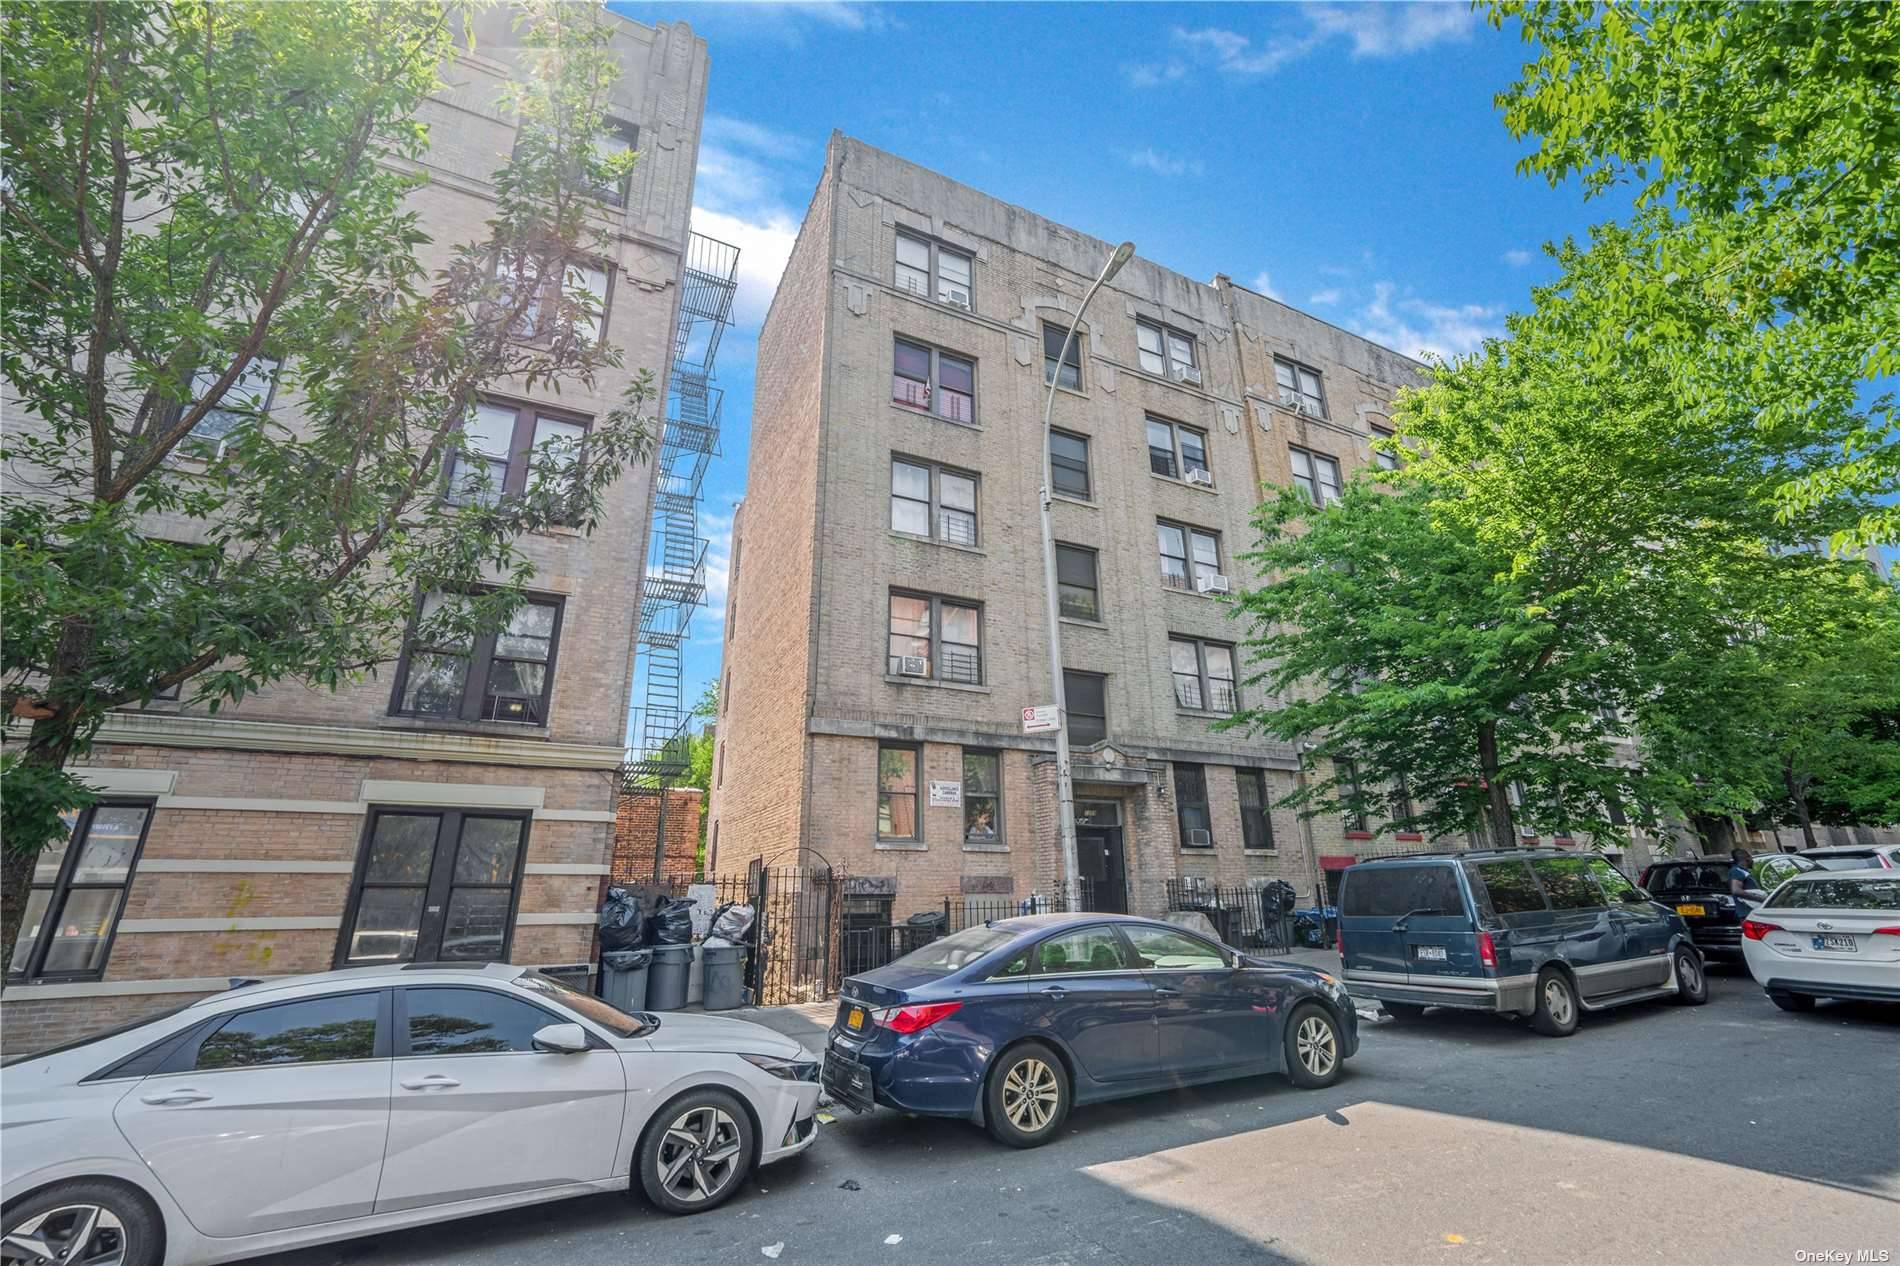 Seller is accepting to creative financing options Seller financing Don't miss your chance to acquire this 11 unit plus package deal two buildings1209 1215 Elder Ave total of 22 units ...